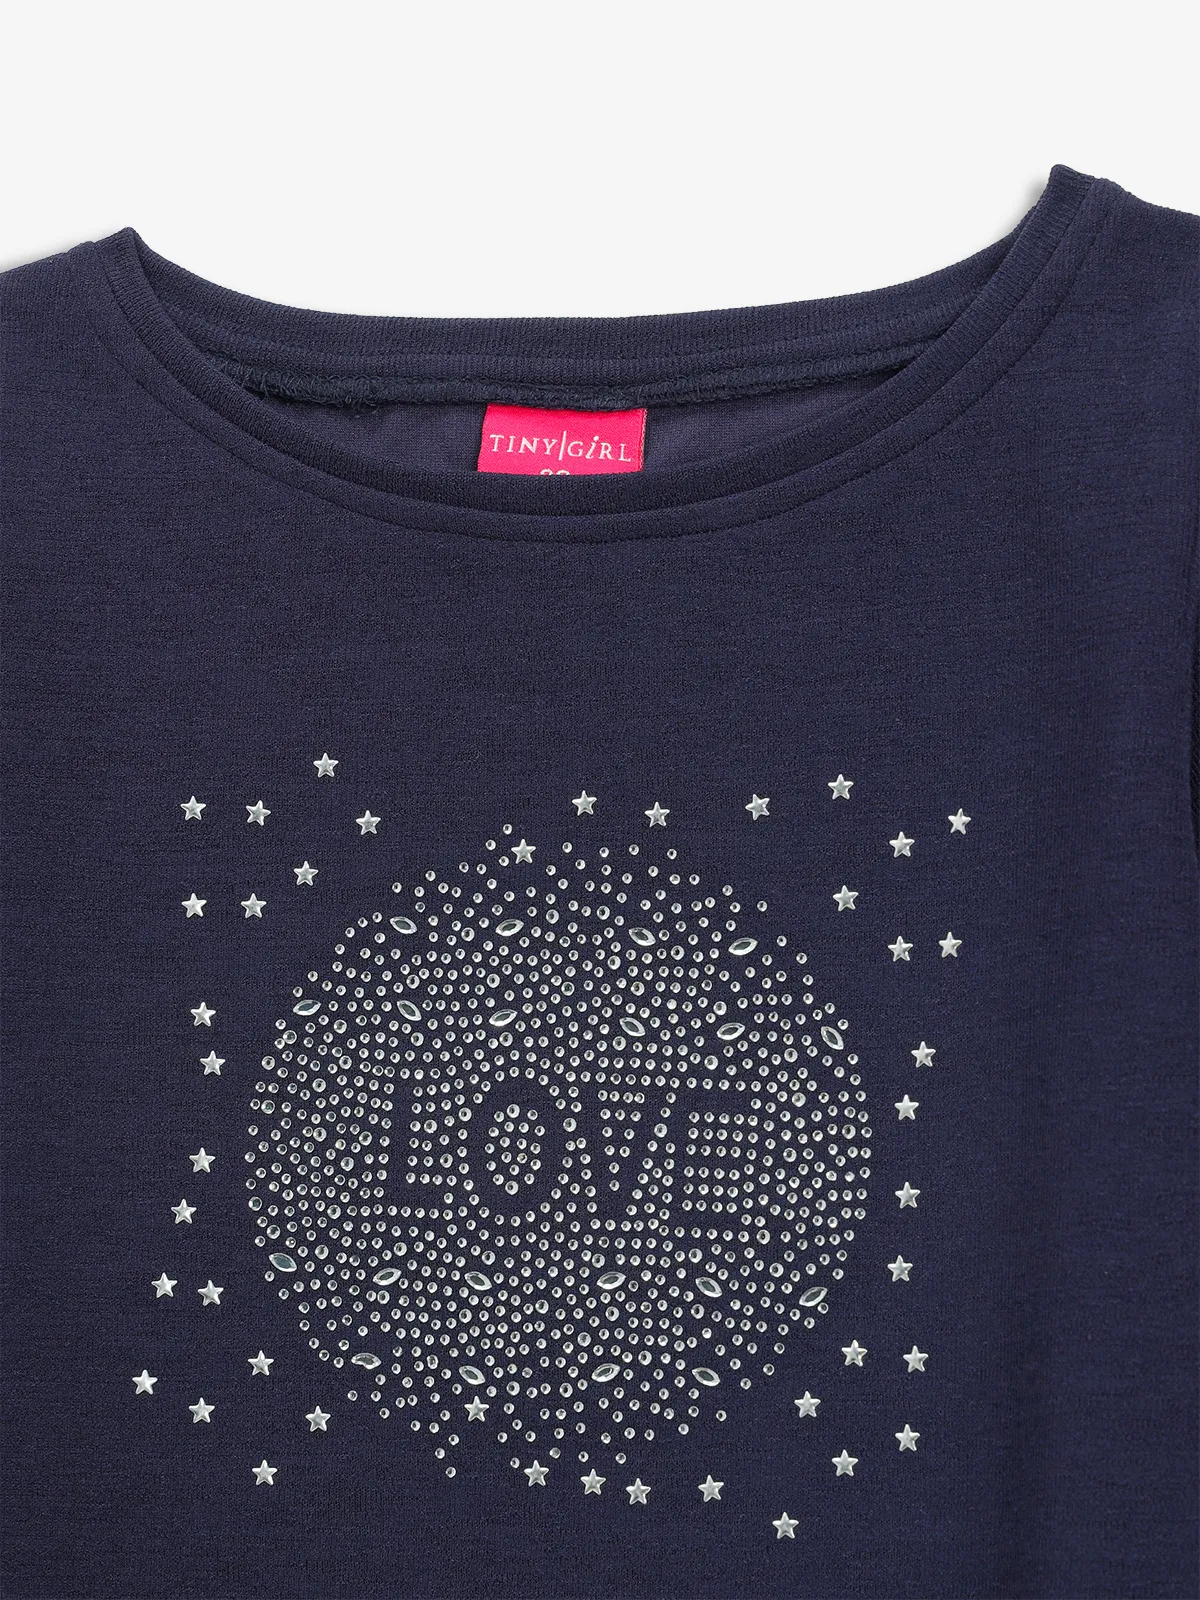 TINY GIRL cotton top in navy